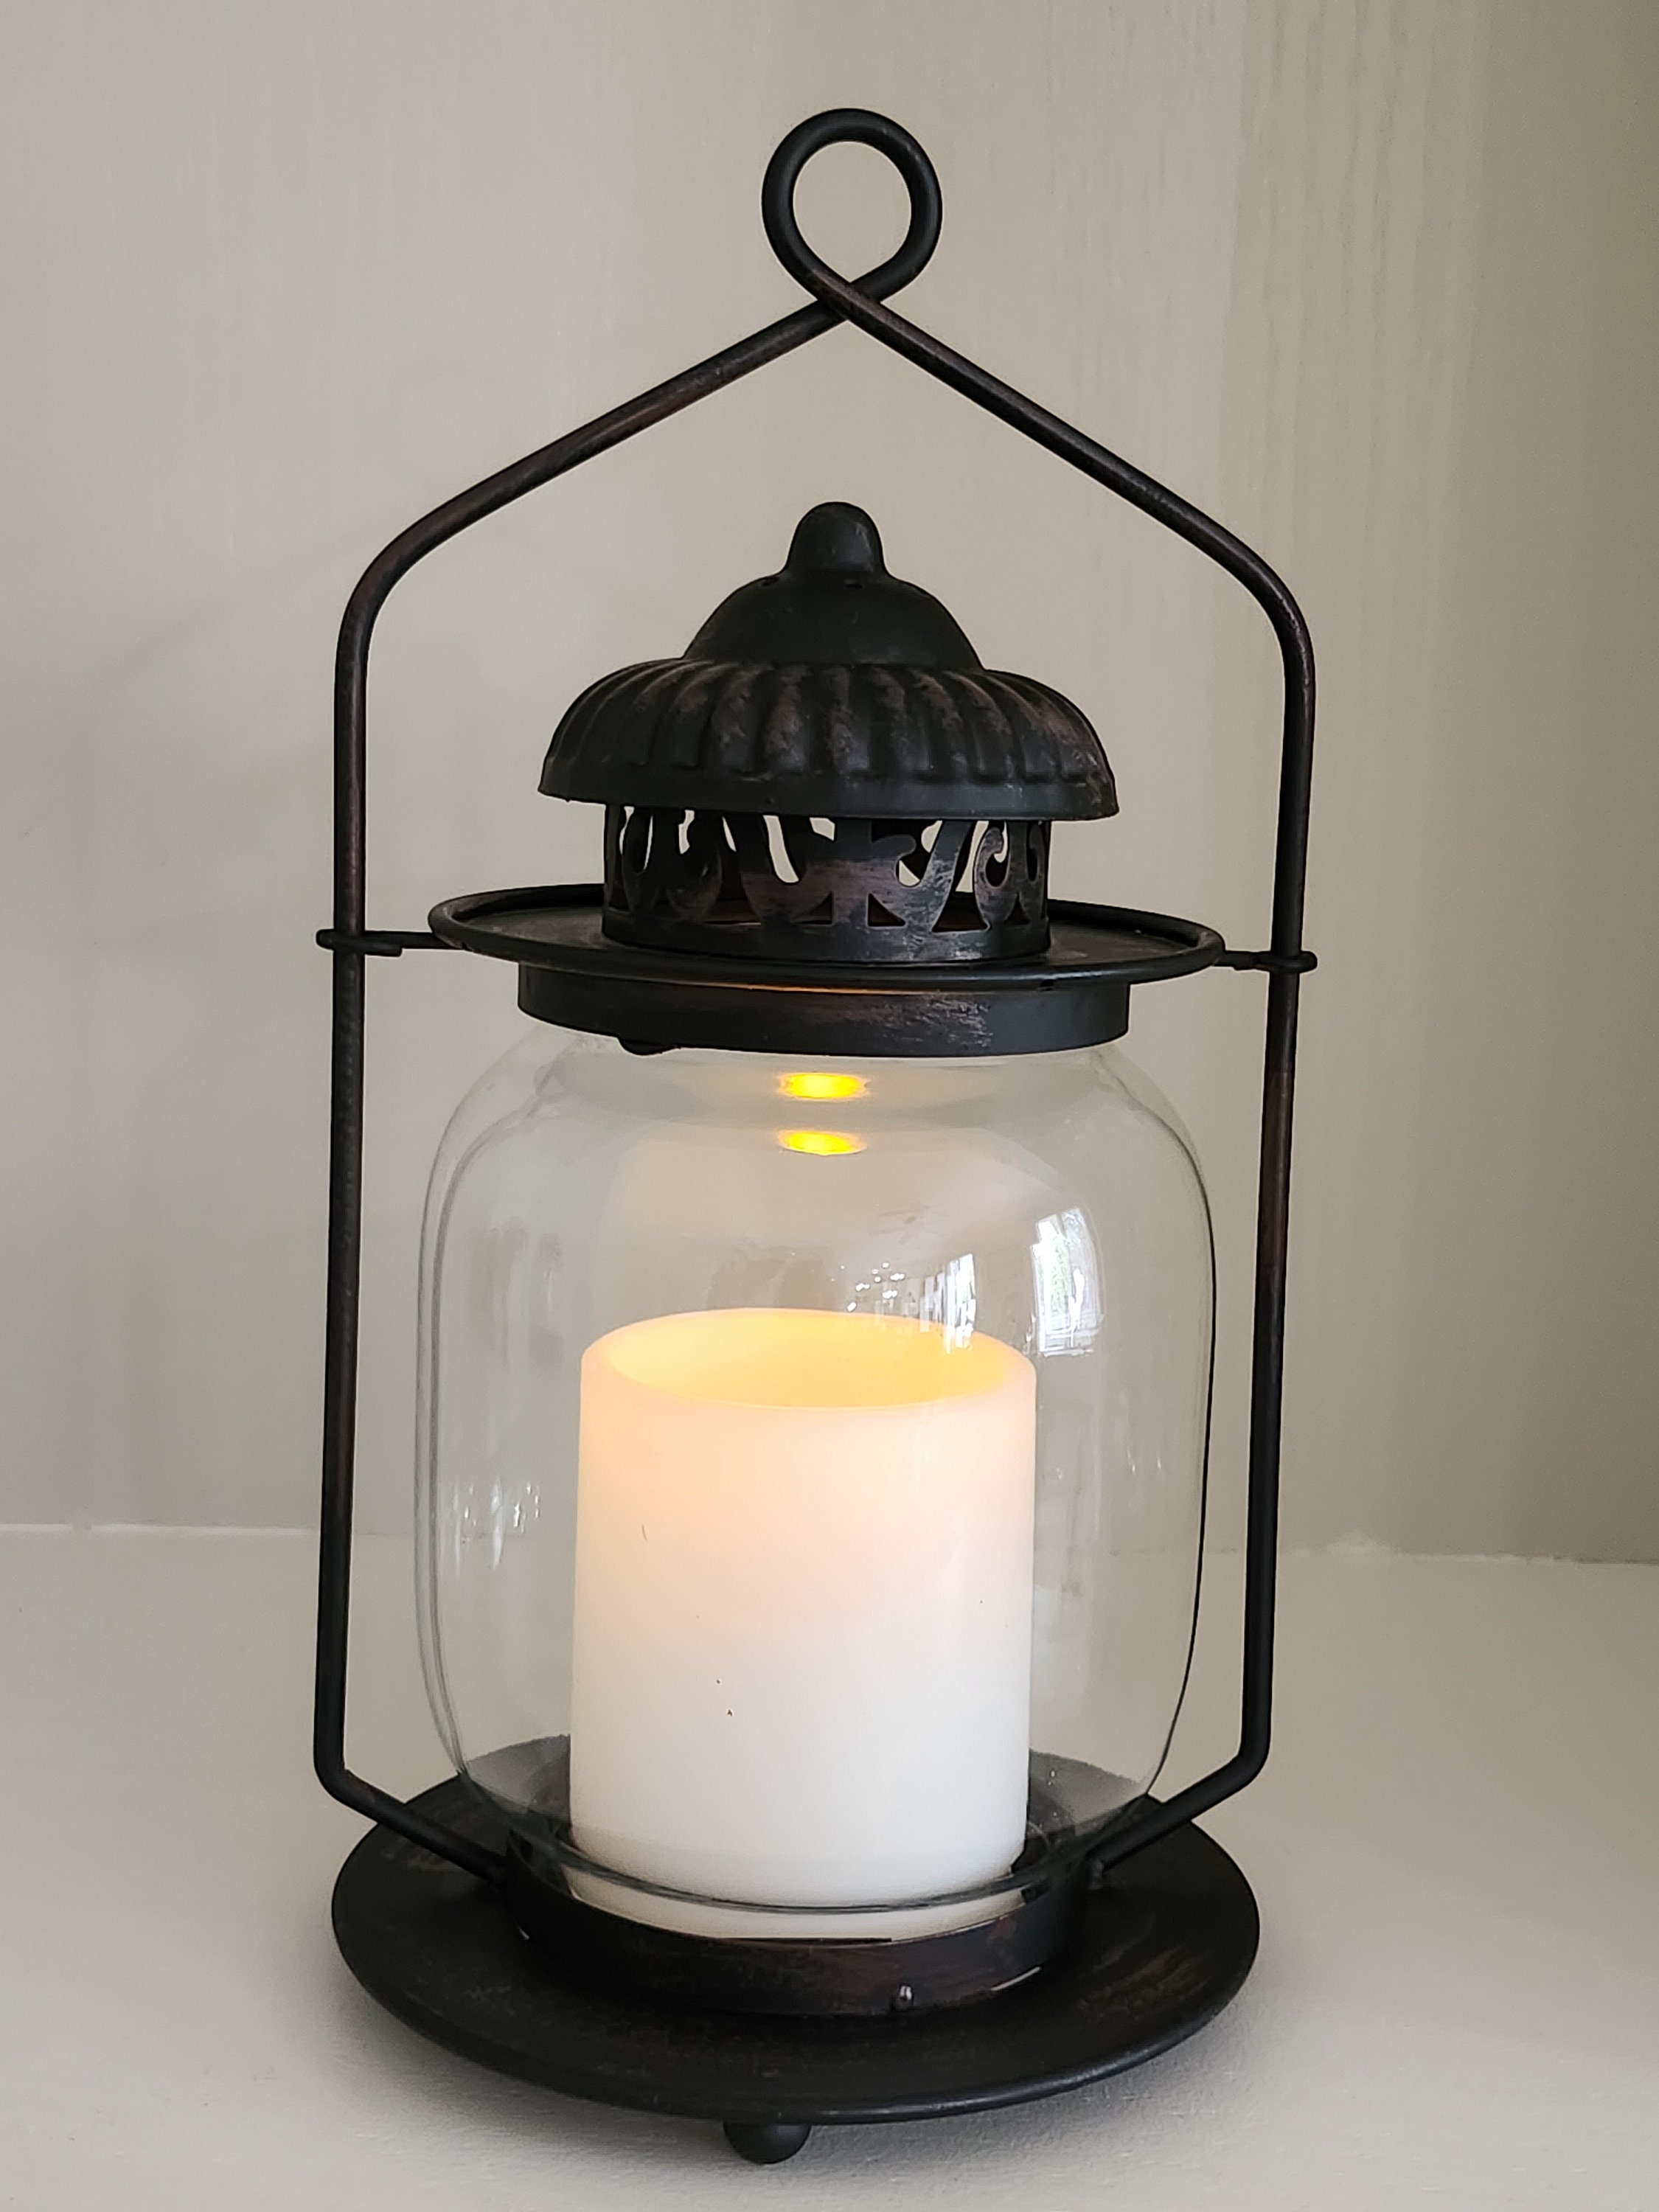 LampLust Indoor Outdoor Lanterns Decorative Lantern Set of 2, 8 Inch  Battery Operated Candle Lantern, Black Metal with No Glass, Flameless LED  Outdoor